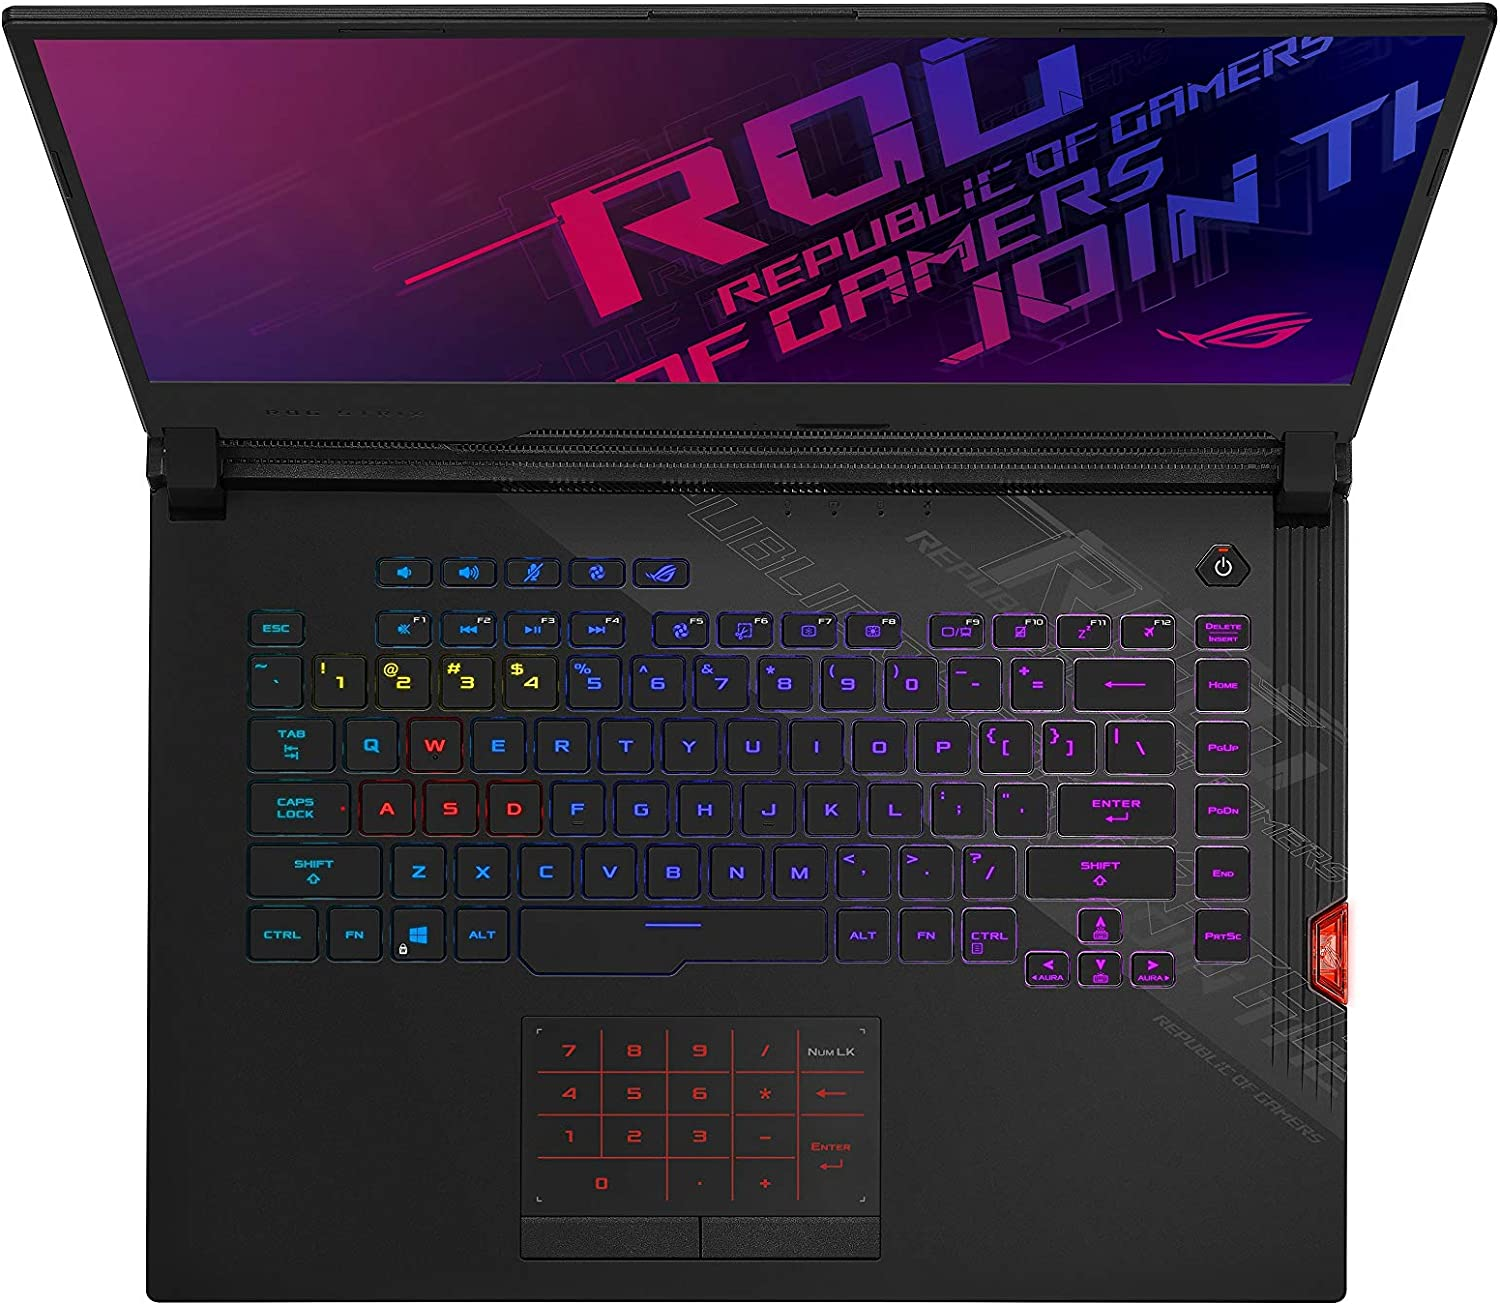 The keys of a mechanical keyboard on a gaming laptop may be smaller making it important that you take care when pressing certain keys or key combinations.